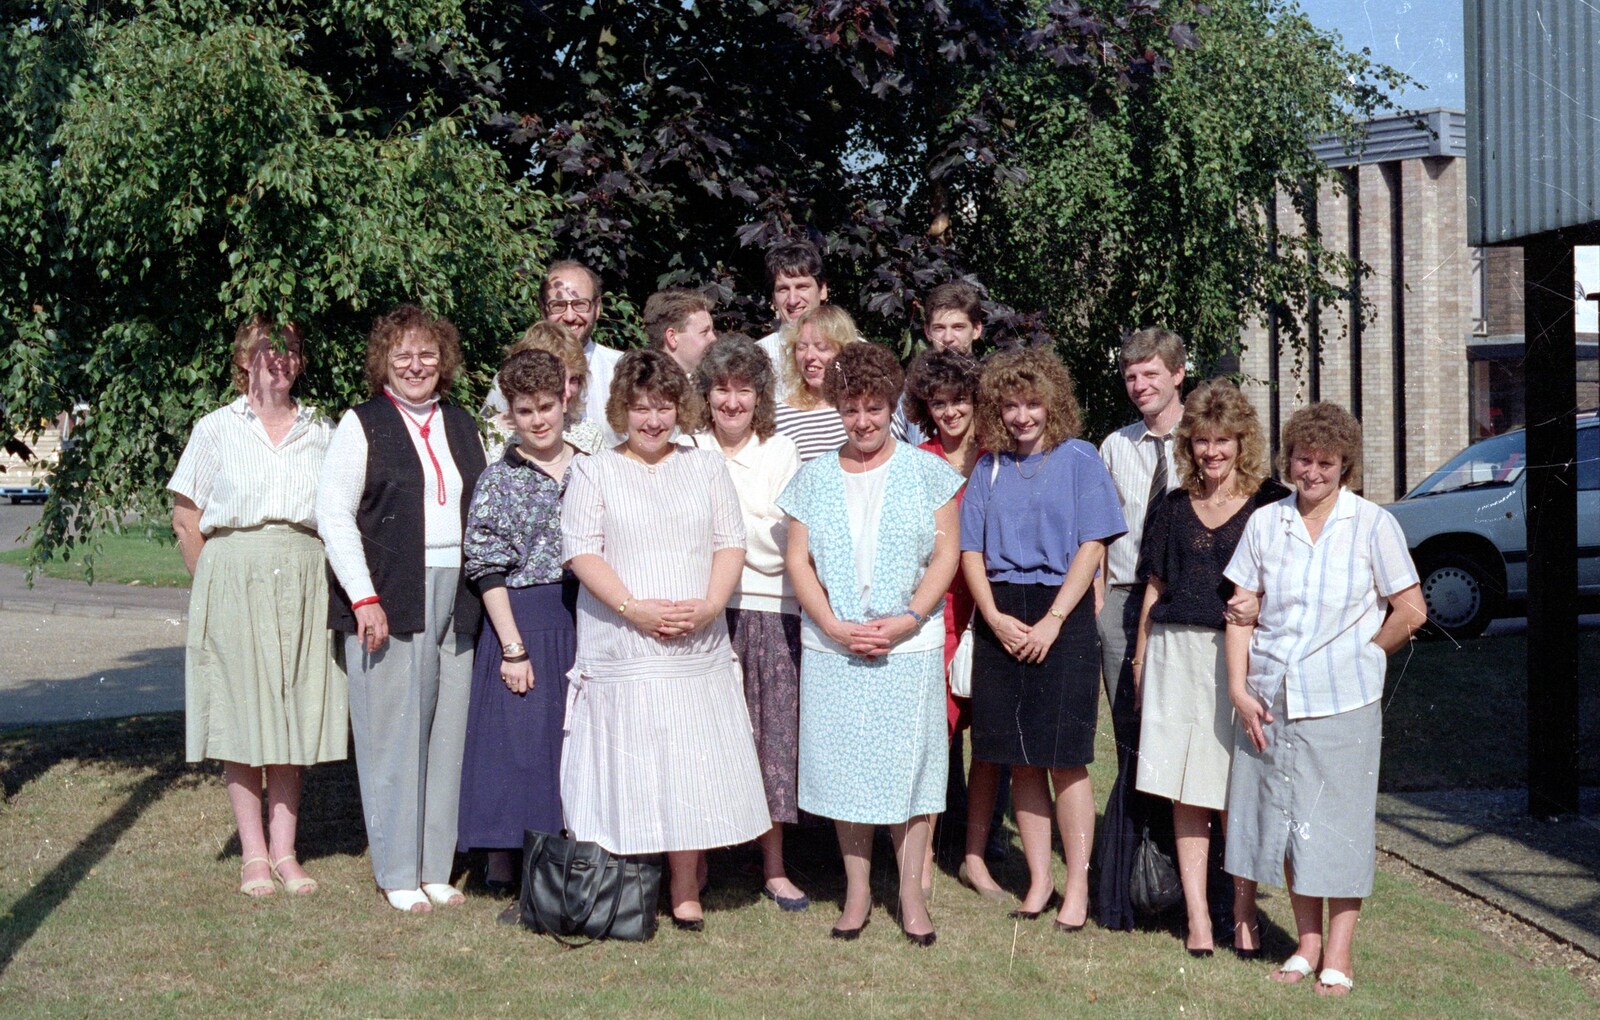 A BPCC Anglia Web office staff group photo from Kite Flying, and an Introduction to BPCC Printec, Diss, Norfolk - 3rd August 1989